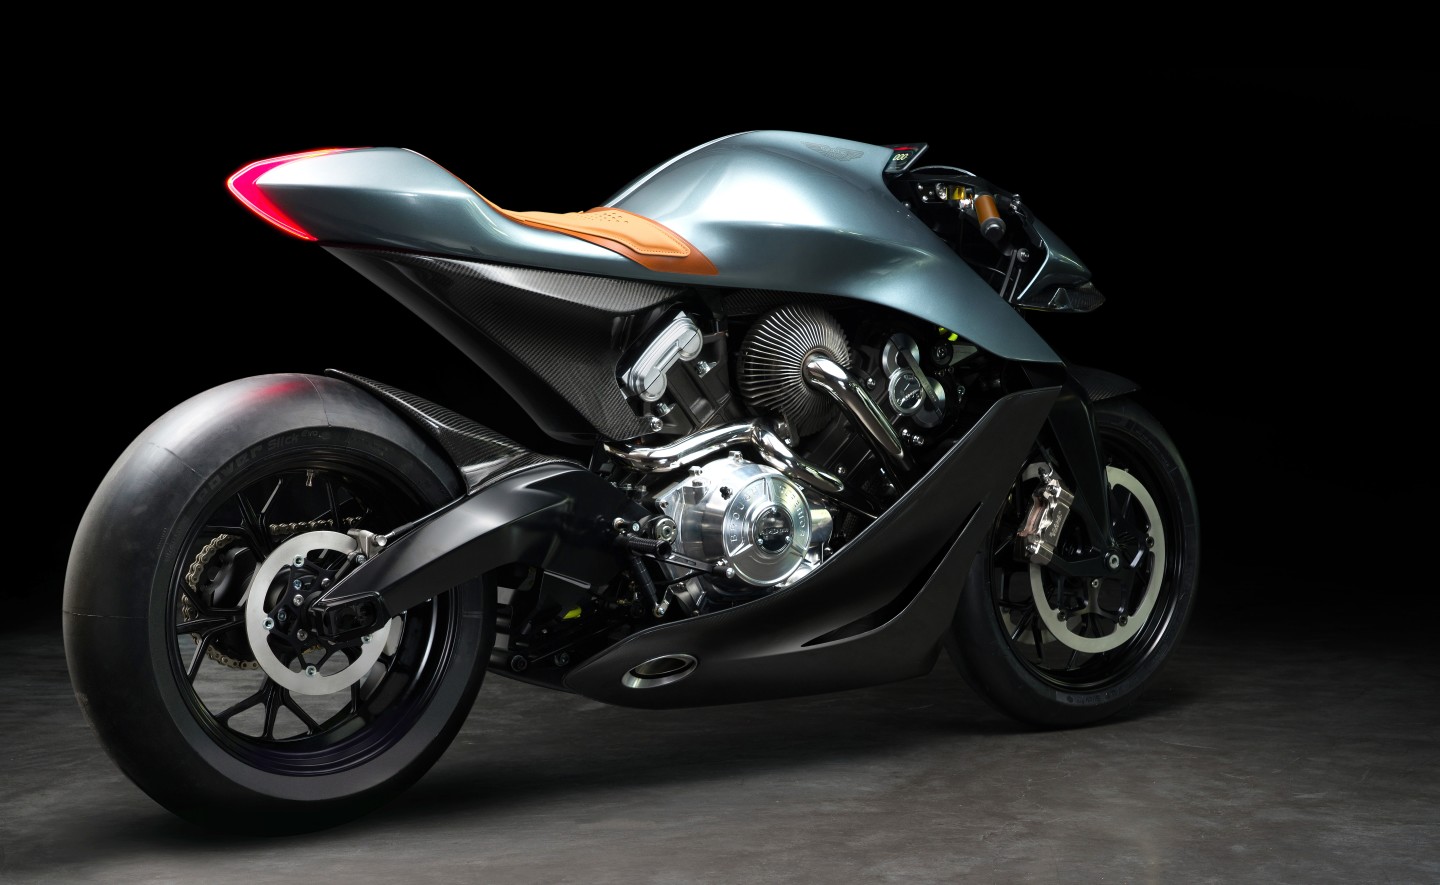 Aston Martin releases ... a turbo motorcycle